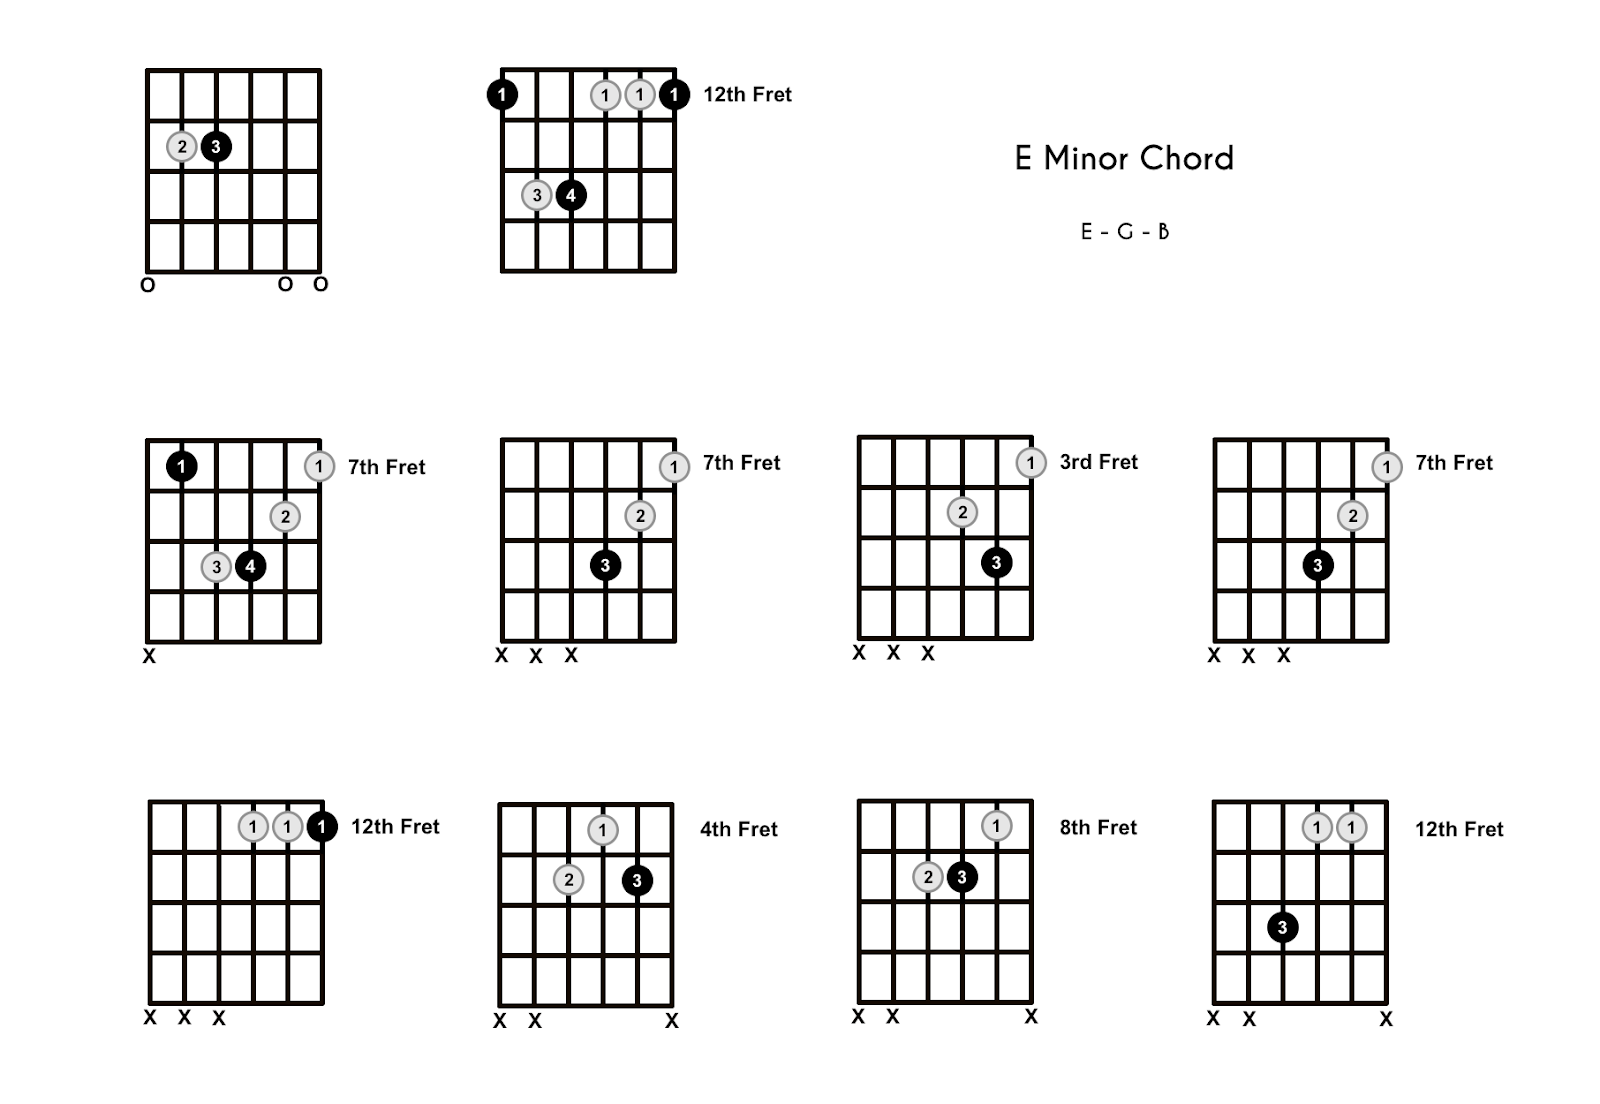 Em Chord on the Guitar (E Minor) – 10 Ways to Play (and Some Tips/Theory)